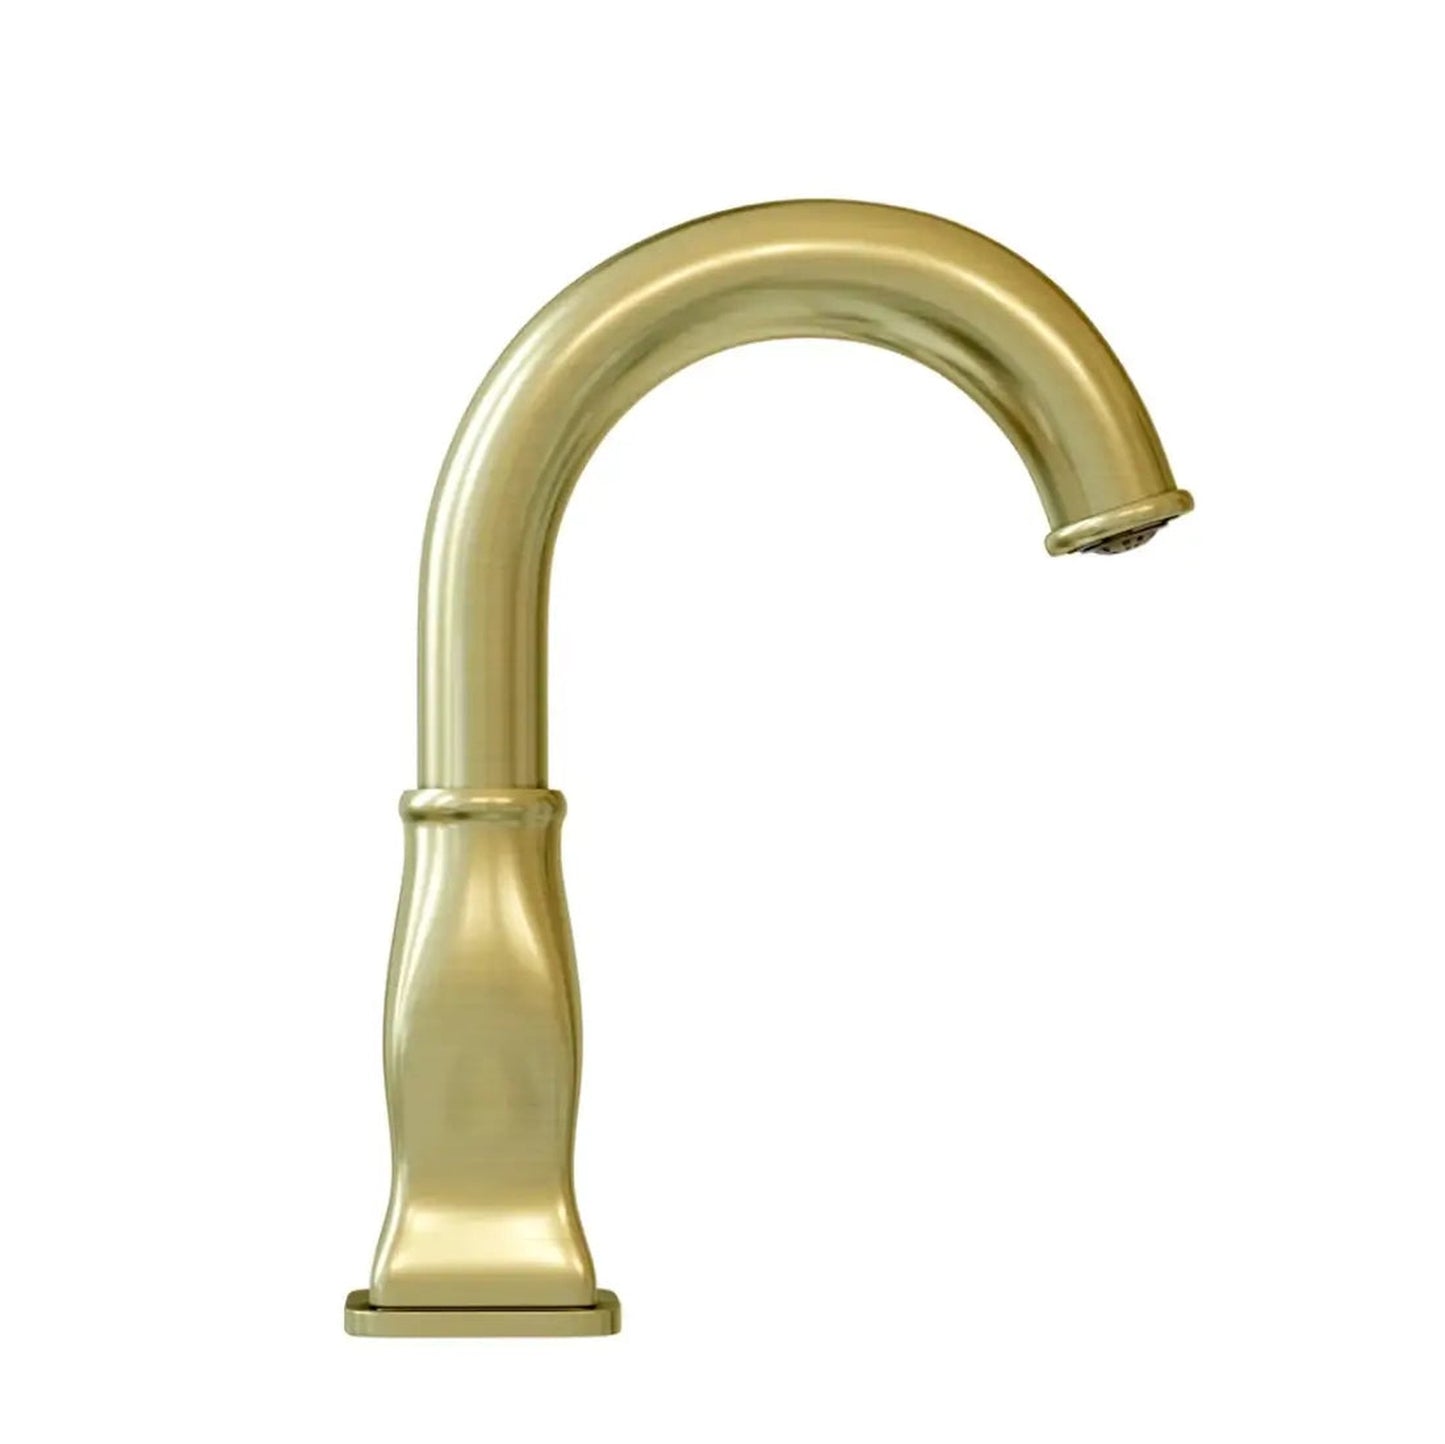 Lulani Aurora Champagne Gold 1.2 GPM Single Hole 1-Handle Brass Faucet With Drain Assembly